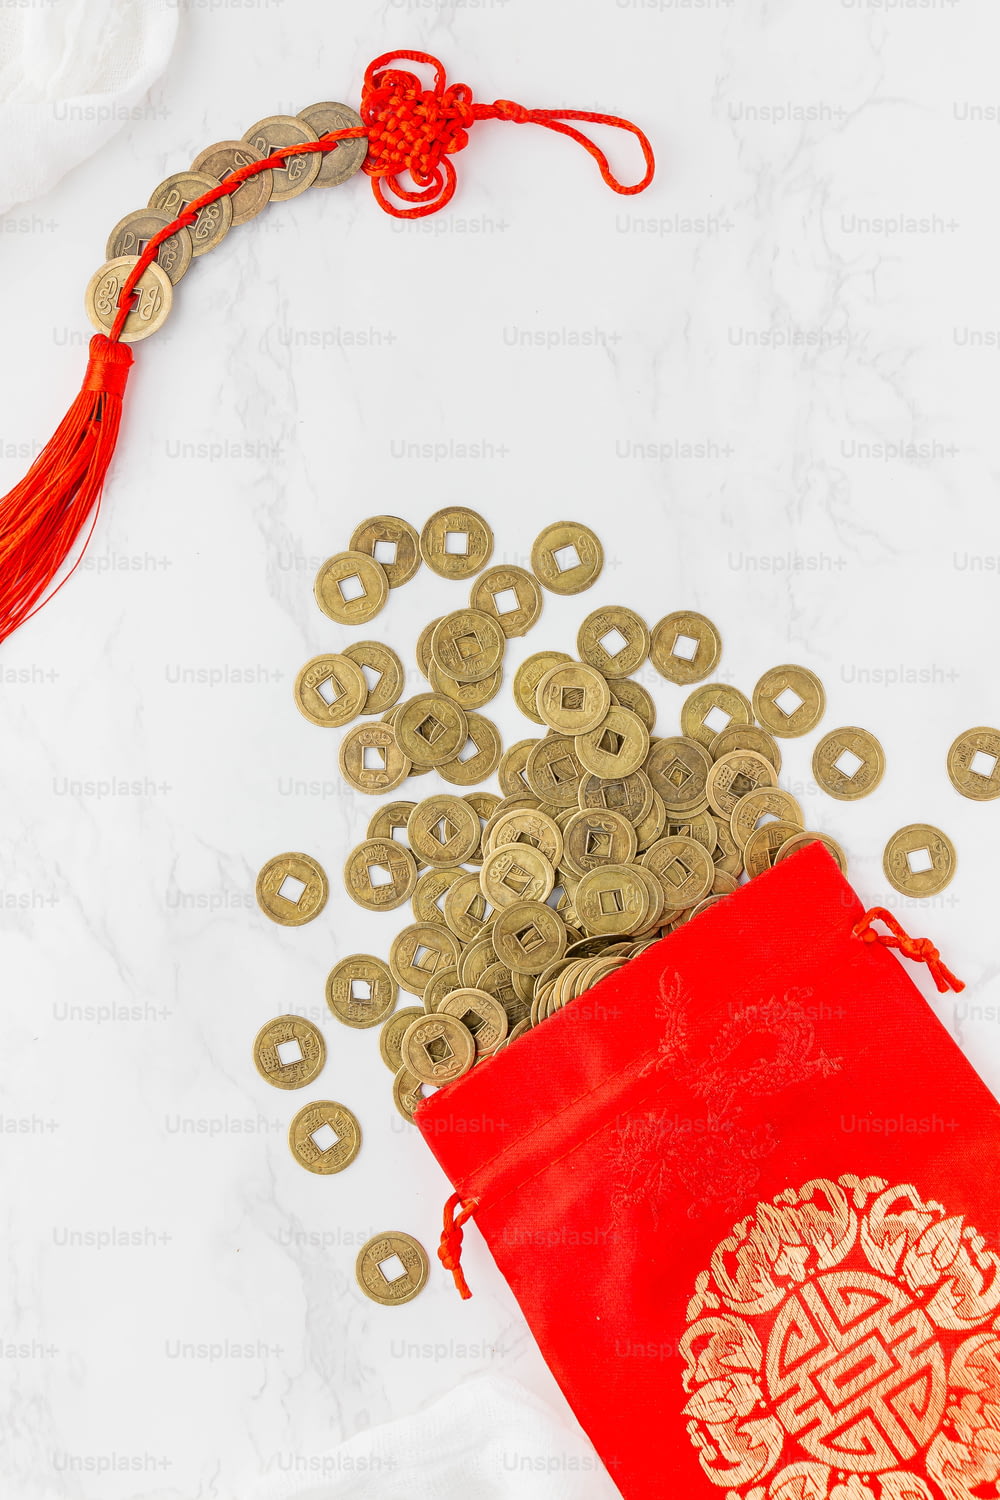 a red bag filled with gold coins next to a red bag filled with gold coins